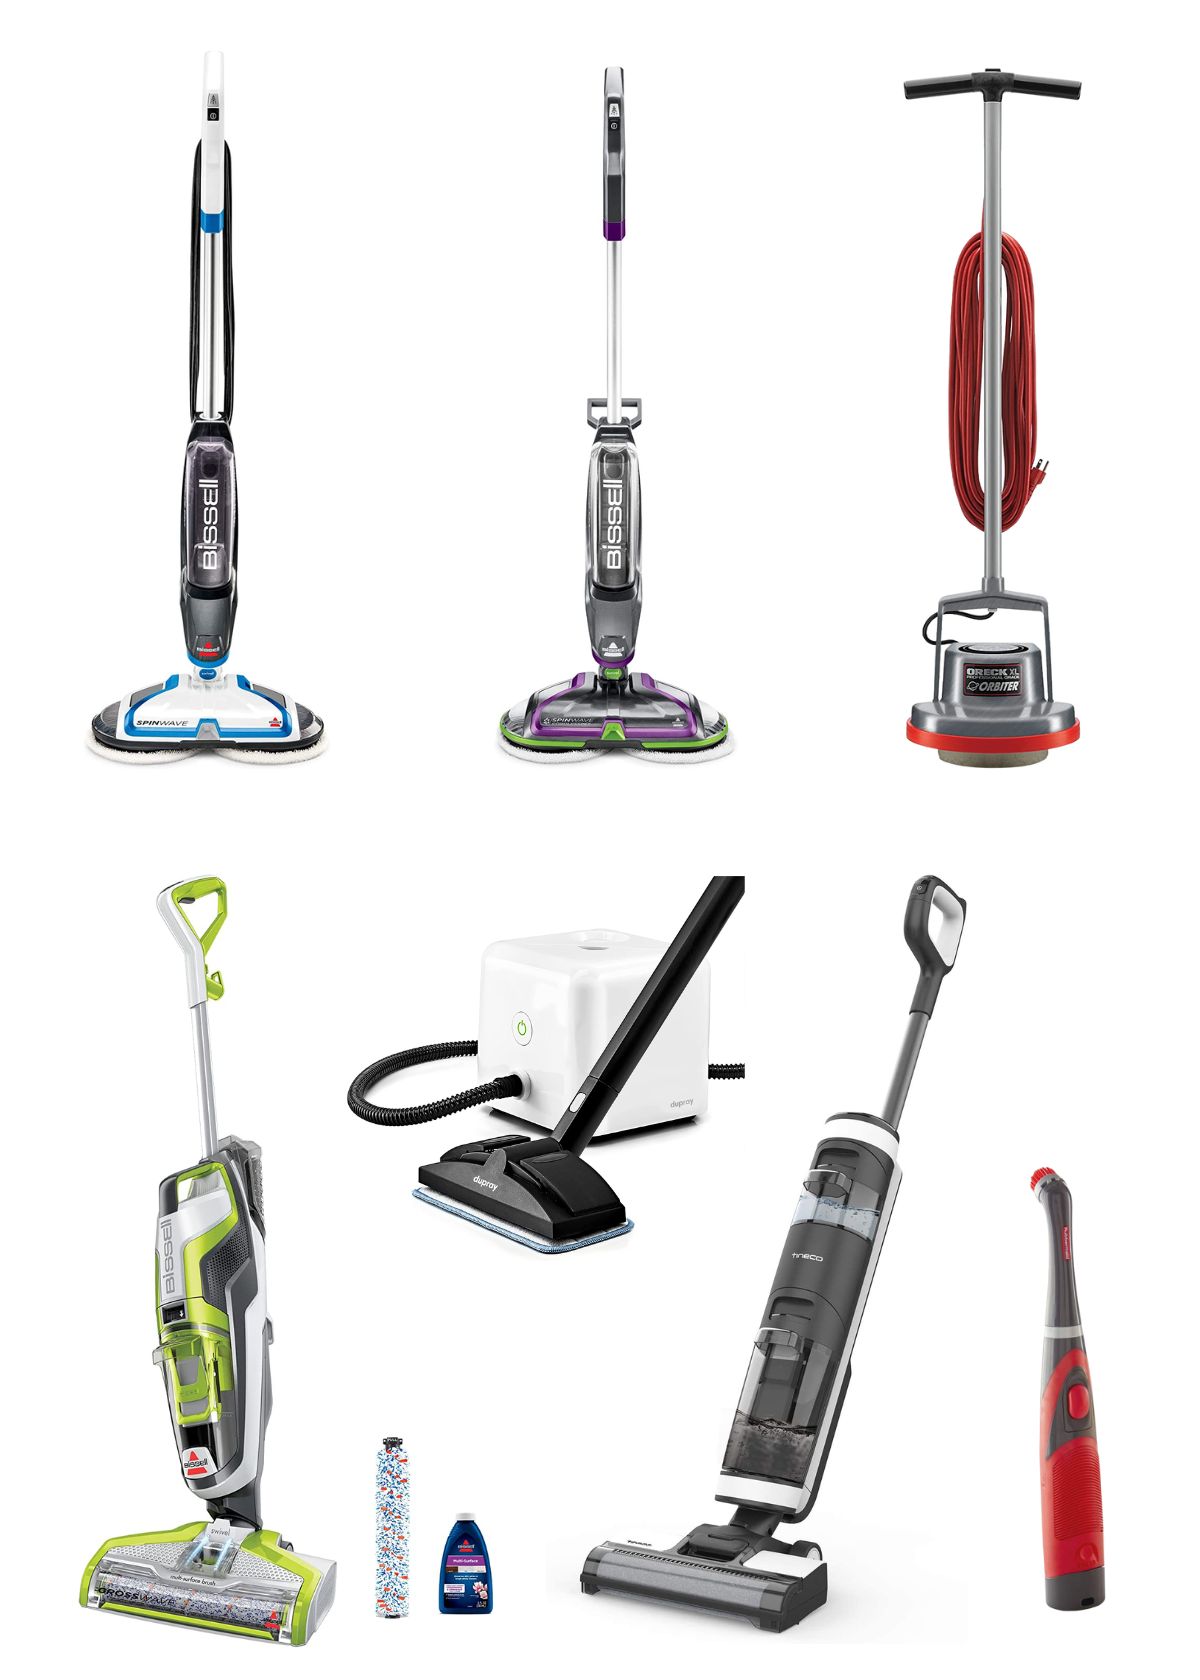 Best Tile Cleaning Machines